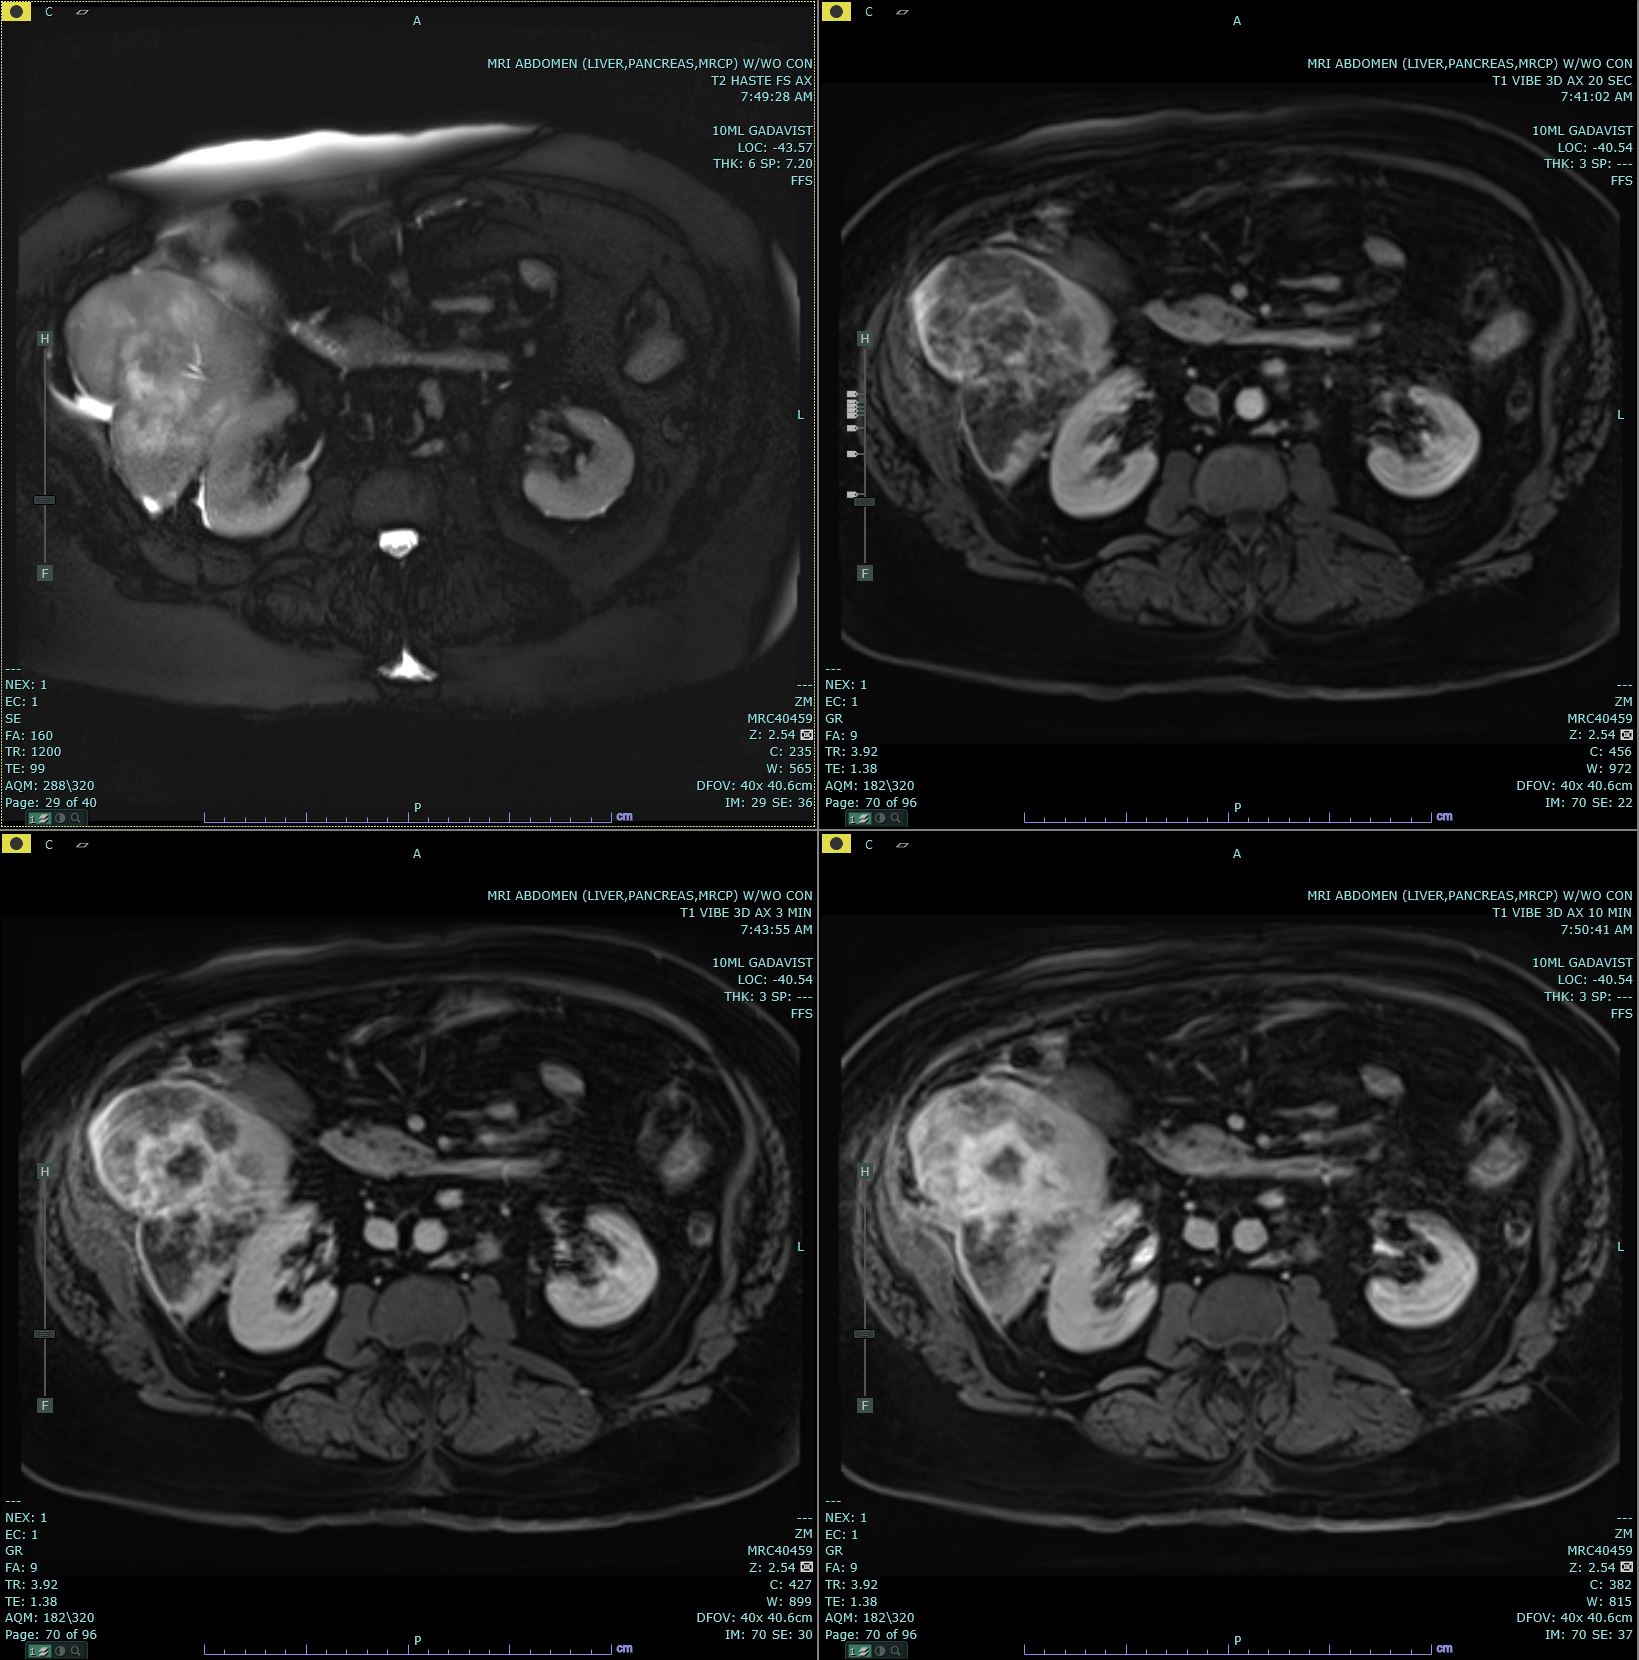 Axial T2 Haste, and 20s, 3 minute and 10 minute post contrast T1 Vibe images are submitted. There is a delayed enhancing mass in segment 7 of the right hepatic lobe which is biopsy proven to be cholangiocarcinoma. This mass has increased T2 signal in comparison to the background liver parenchyma. 